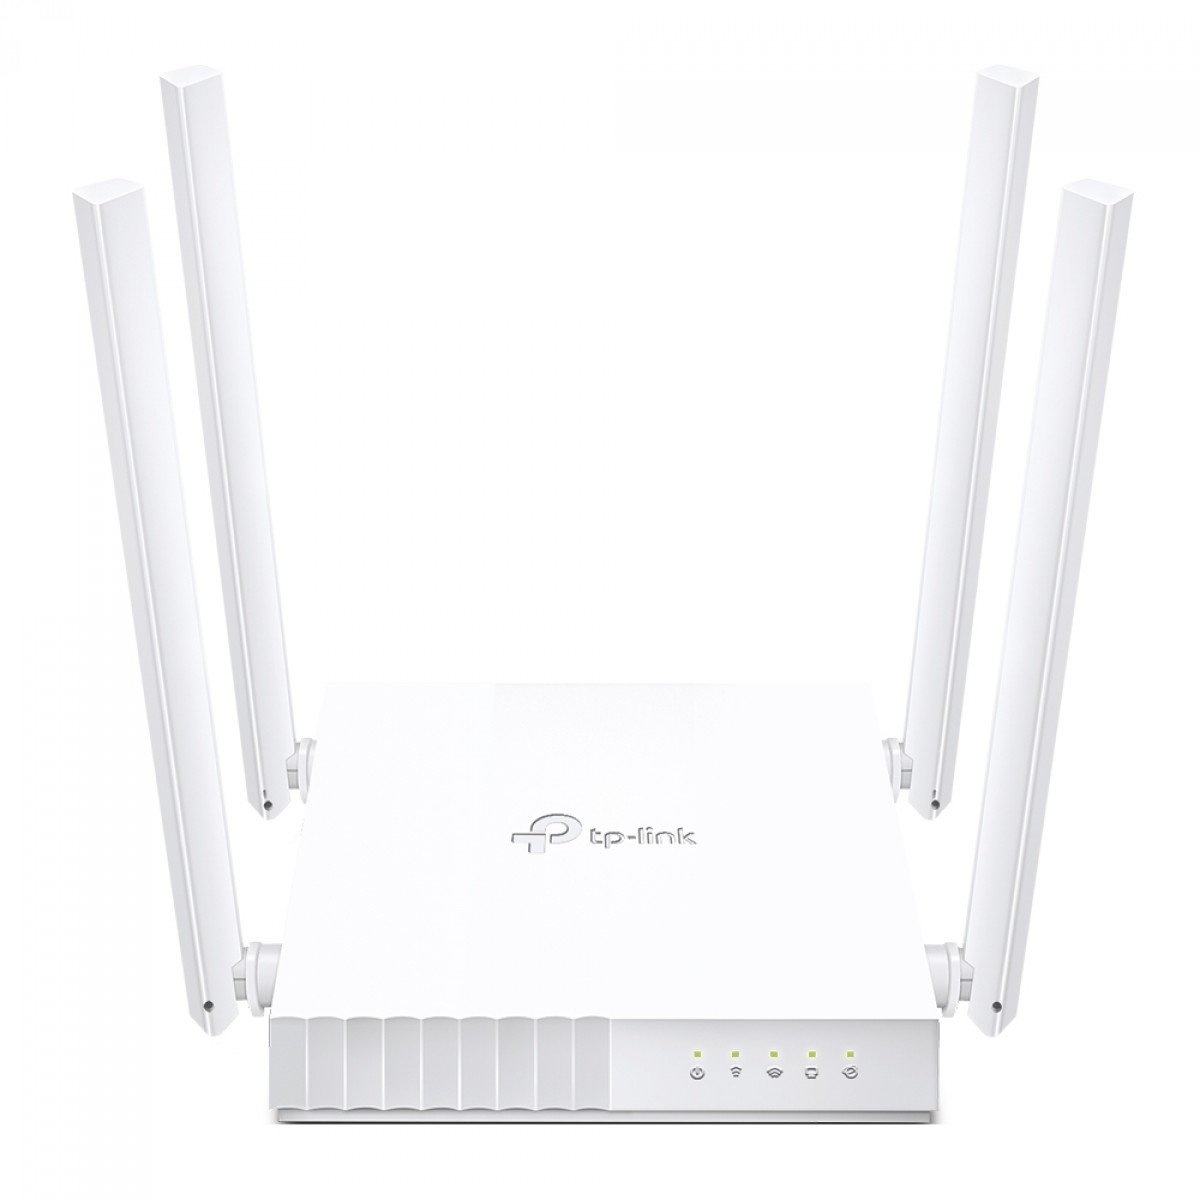 ROTEADOR WIRELESS DUAL BAND AC 750 ARCHER C21 TP-LINK